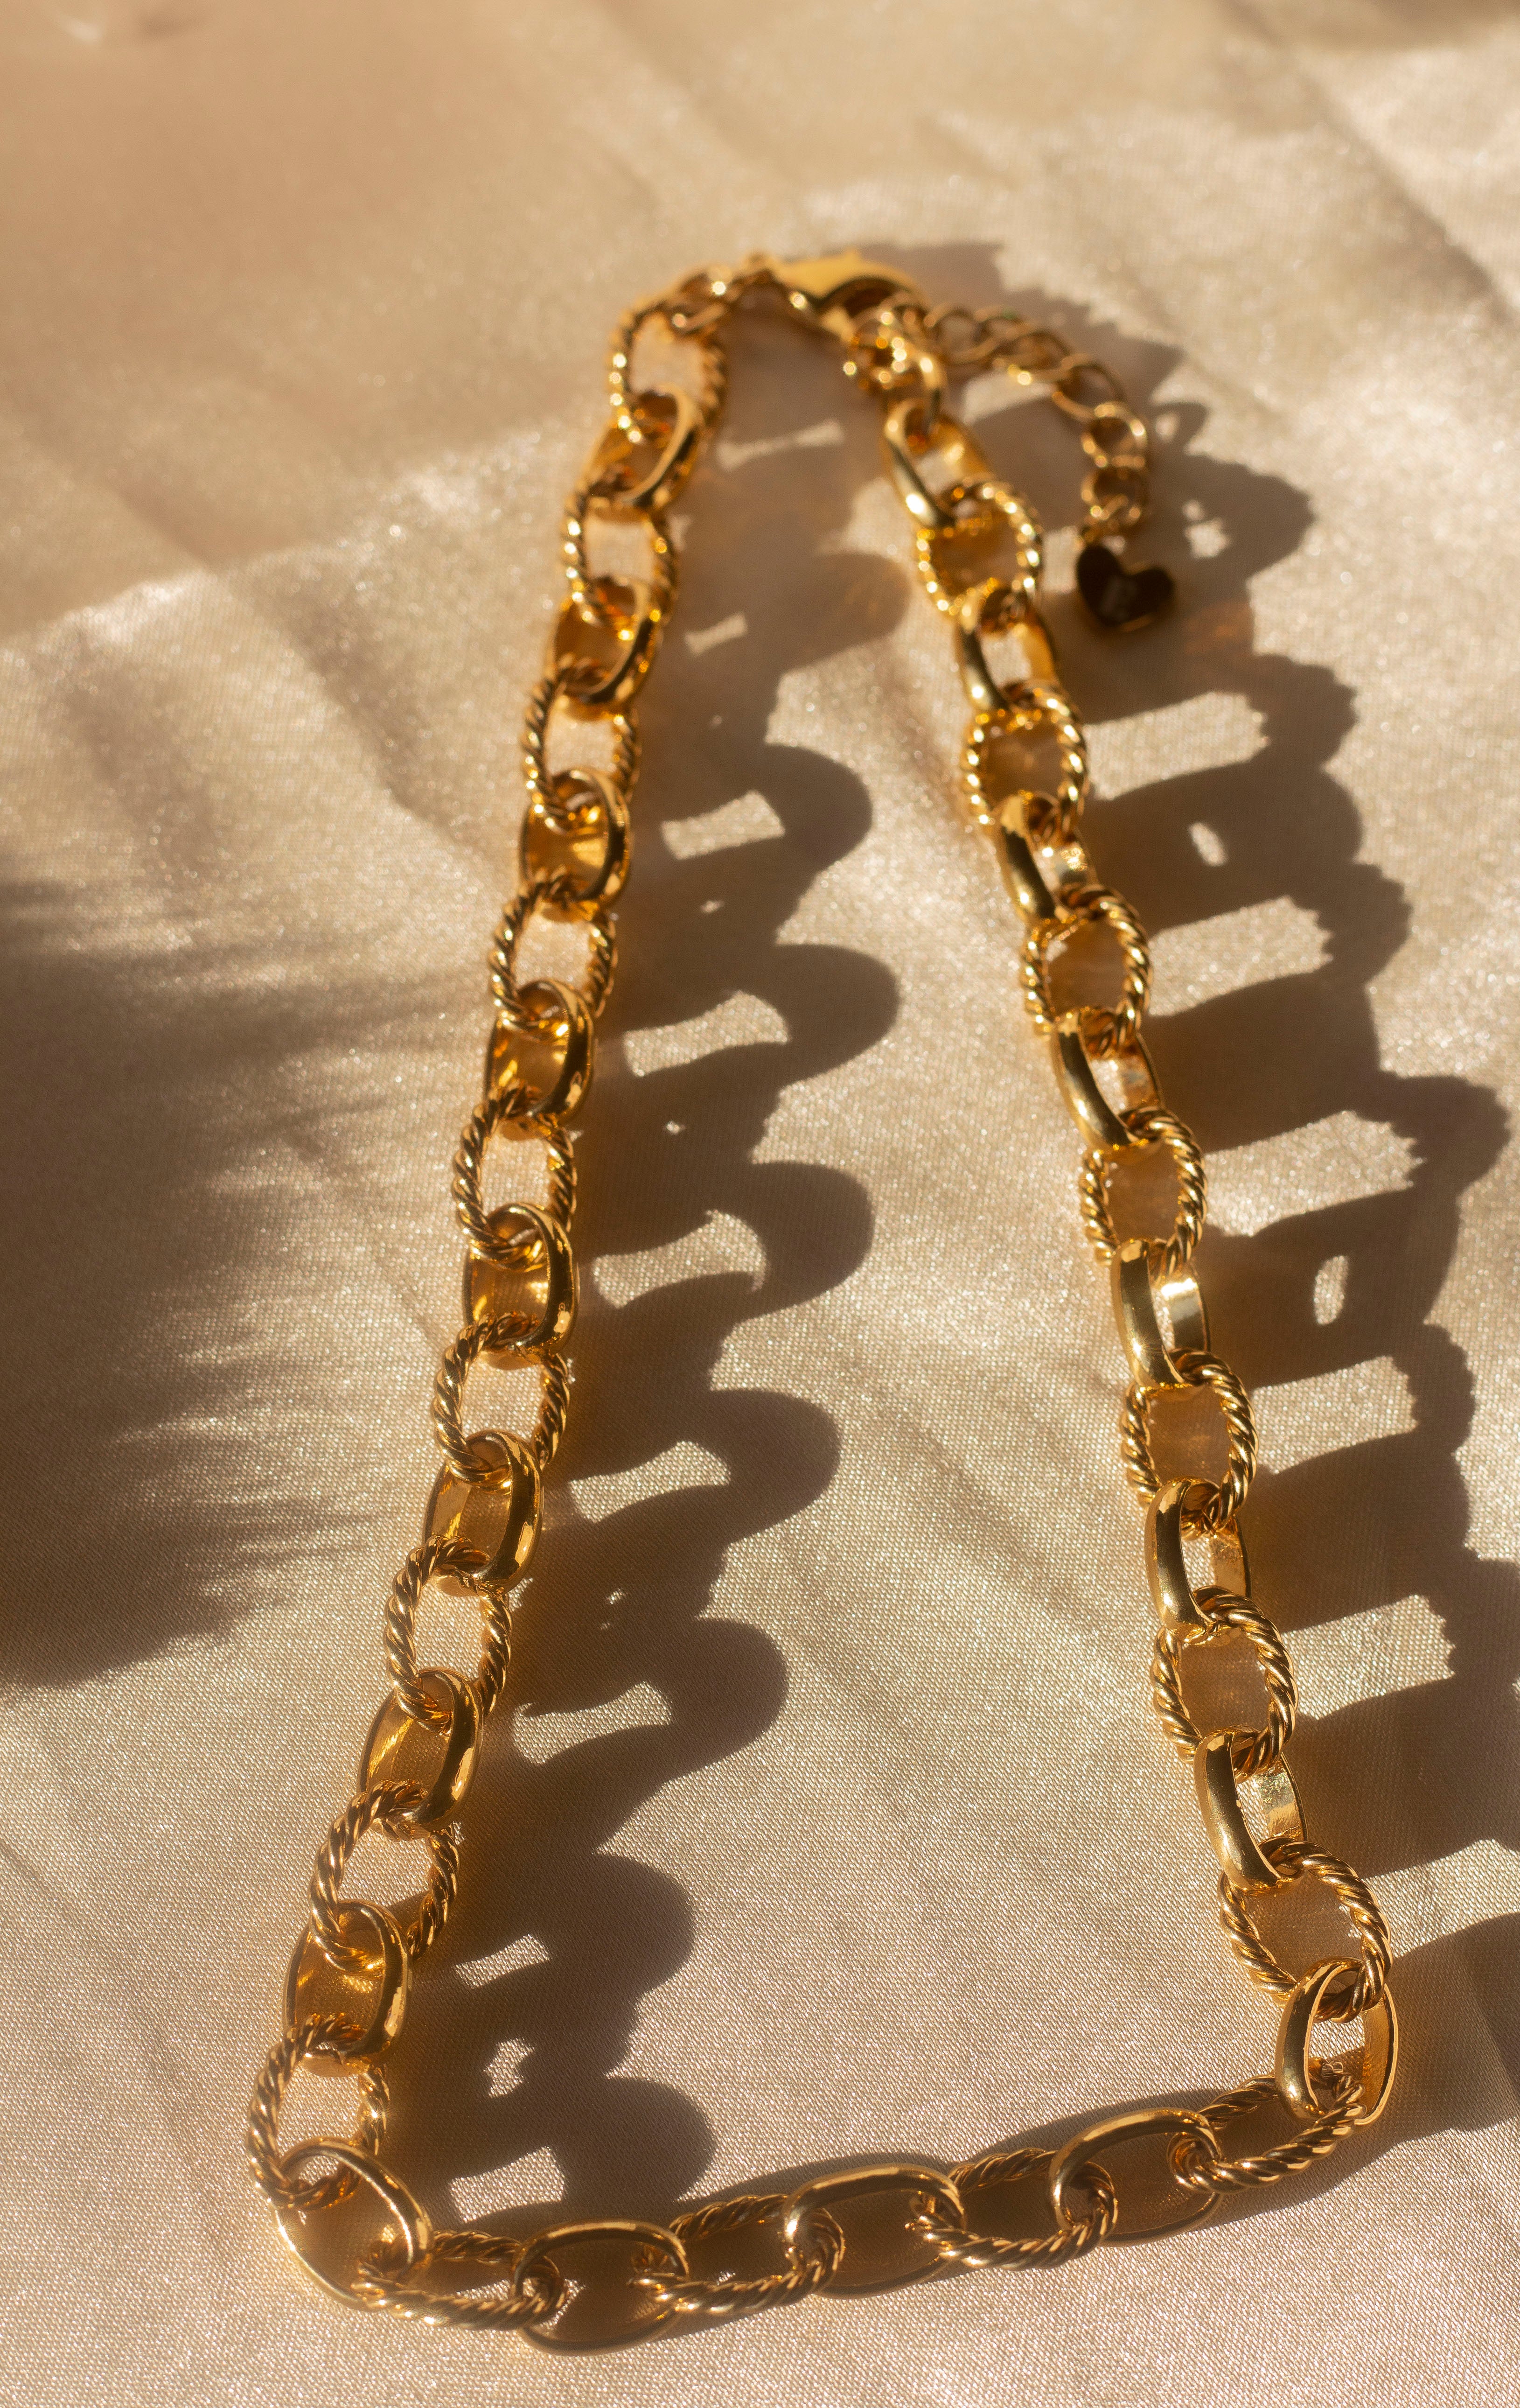 18k gold chain necklace with a rope pattern. The chain is placed on a beige cloth. Rope Link Signature Chain by E's Element.